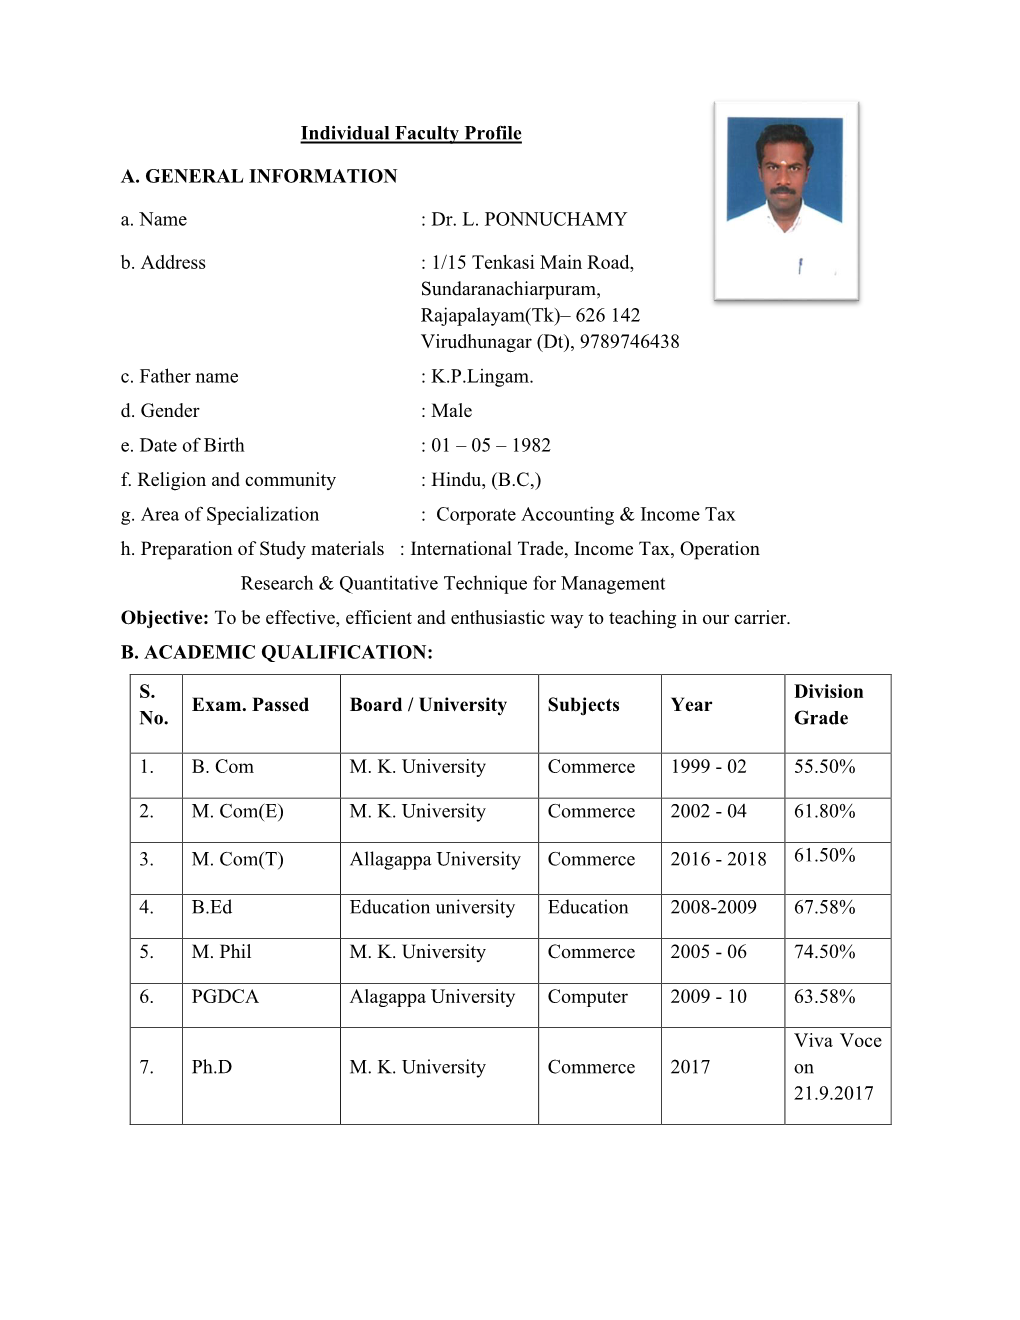 Individual Faculty Profile